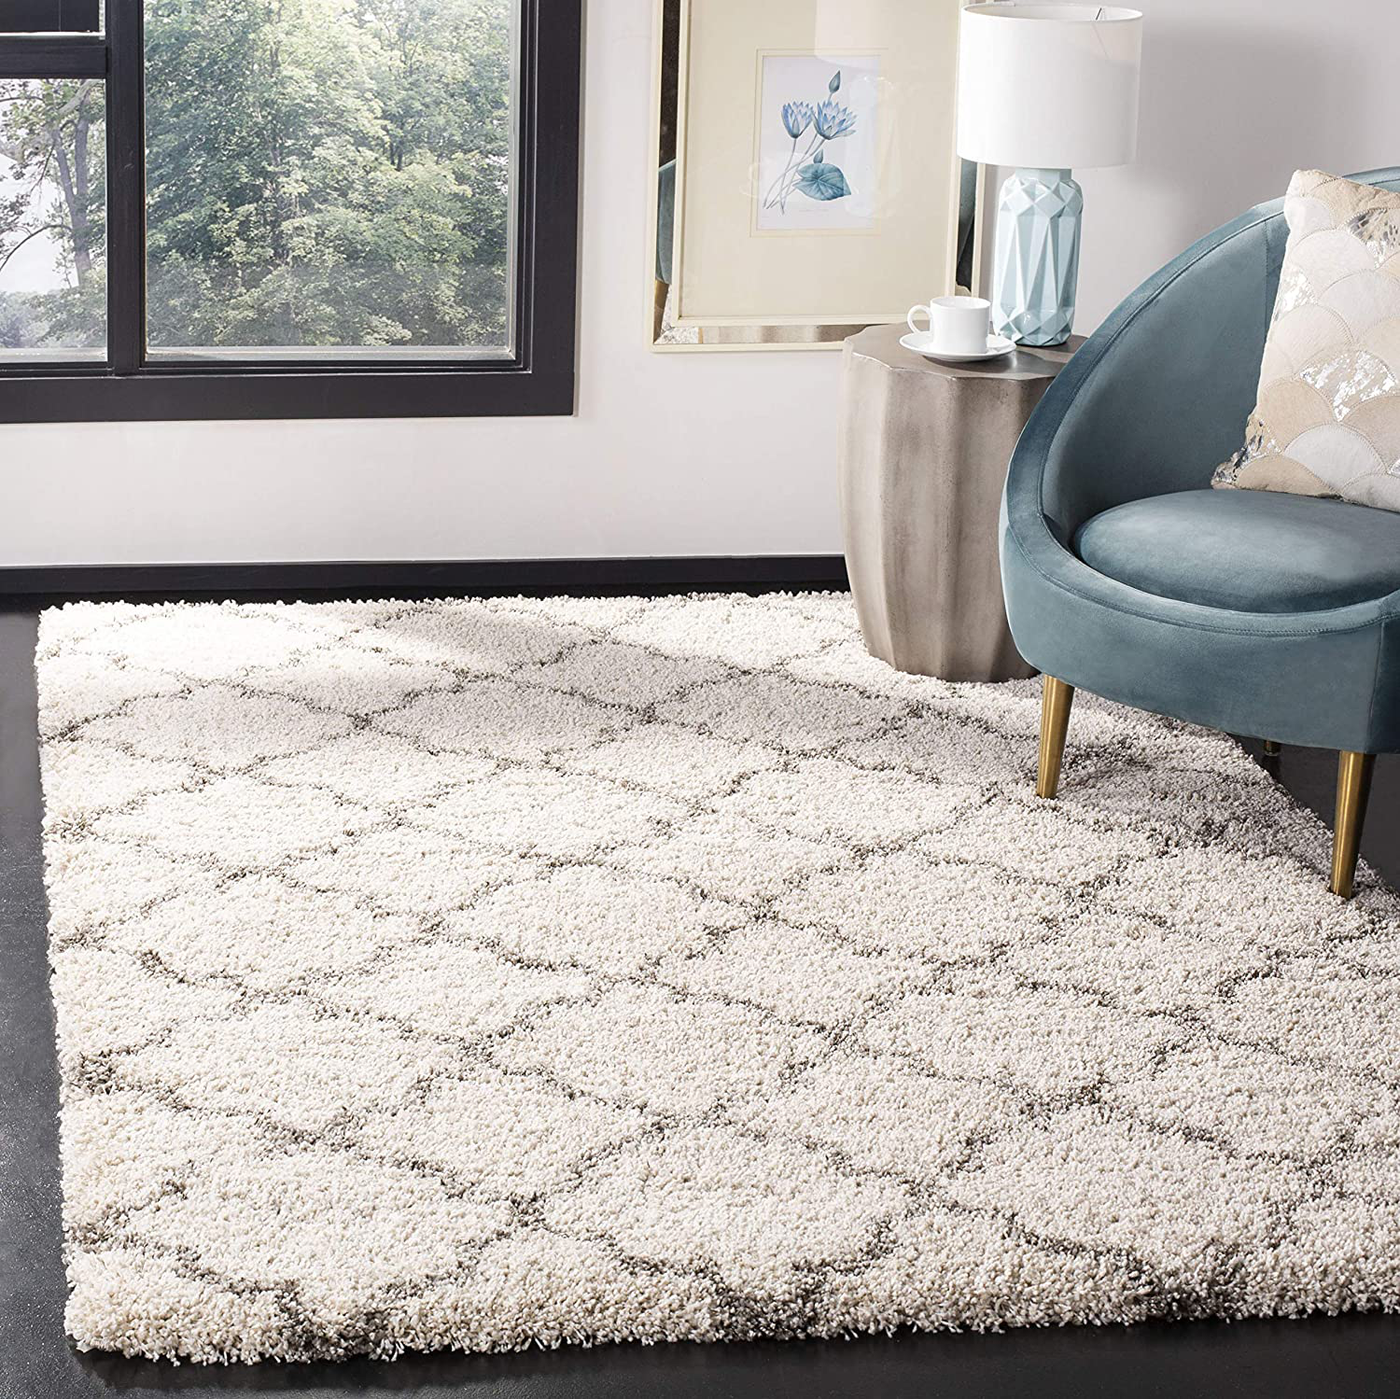 SAFAVIEH Hudson Shag Collection SGH282L Moroccan Trellis Non-Shedding Living Room Bedroom Dining Room Entryway Plush 2-inch Thick Area Rug, 5' x 5' Square, Slate Blue / Ivory